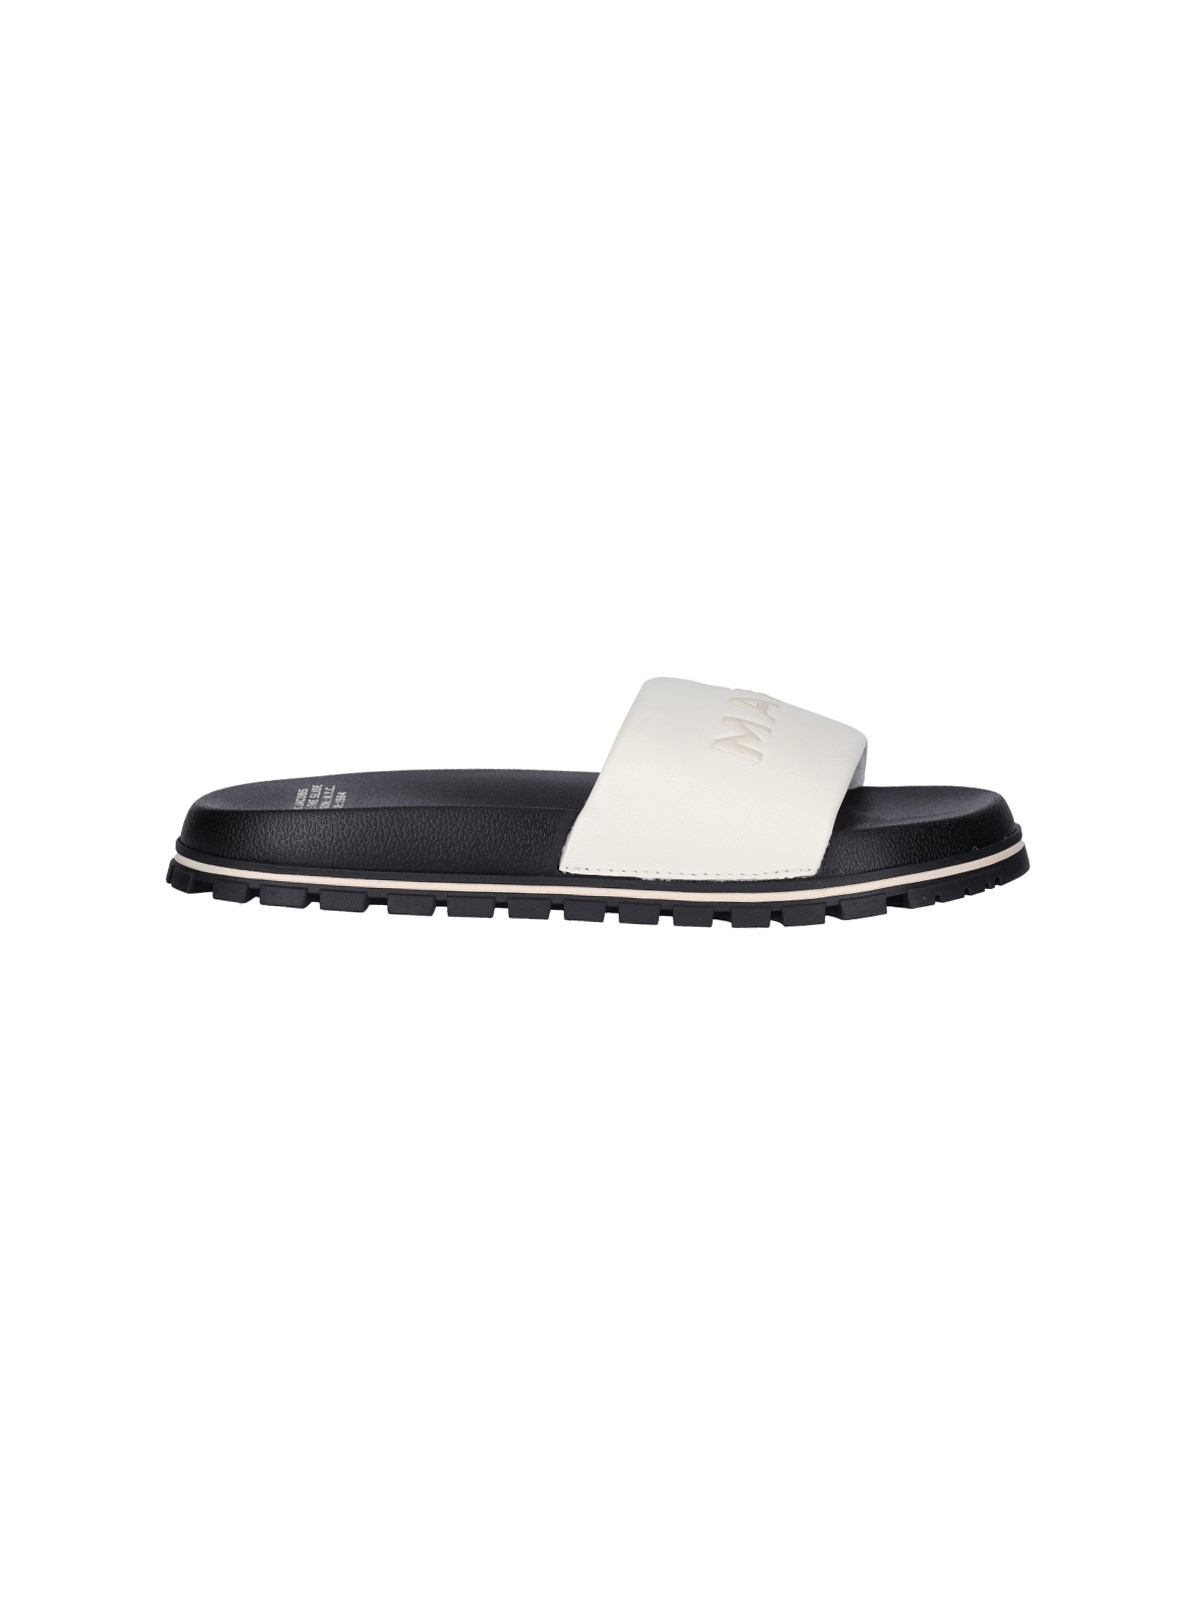 "THE LEATHER" SLIDE SANDALS - 1